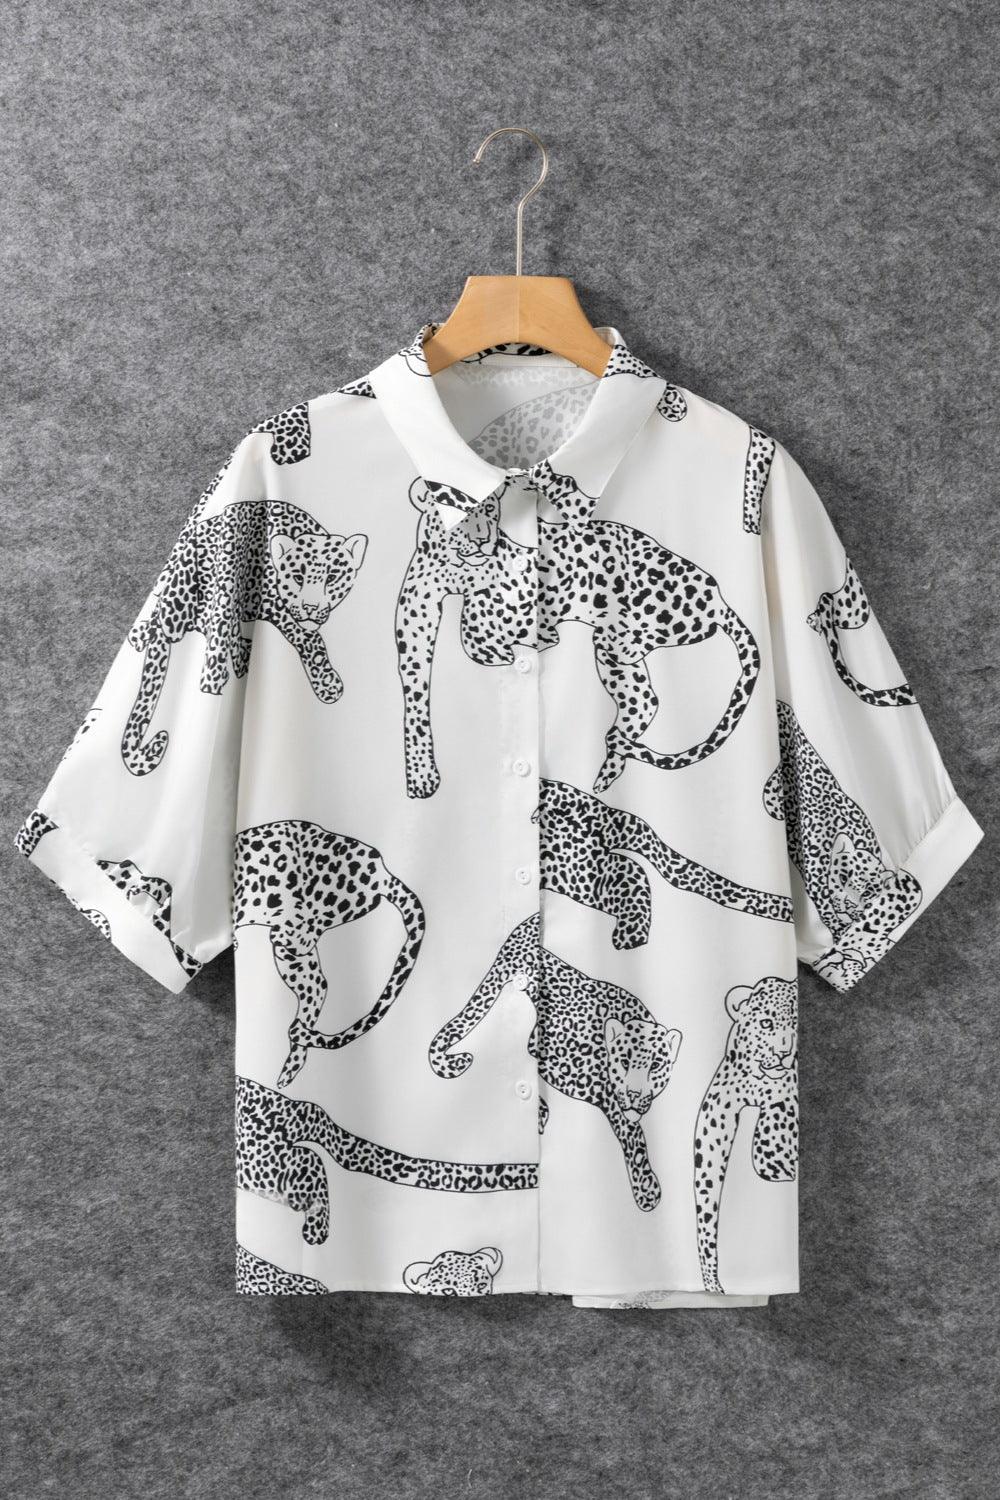 a white shirt with black and white leopards on it